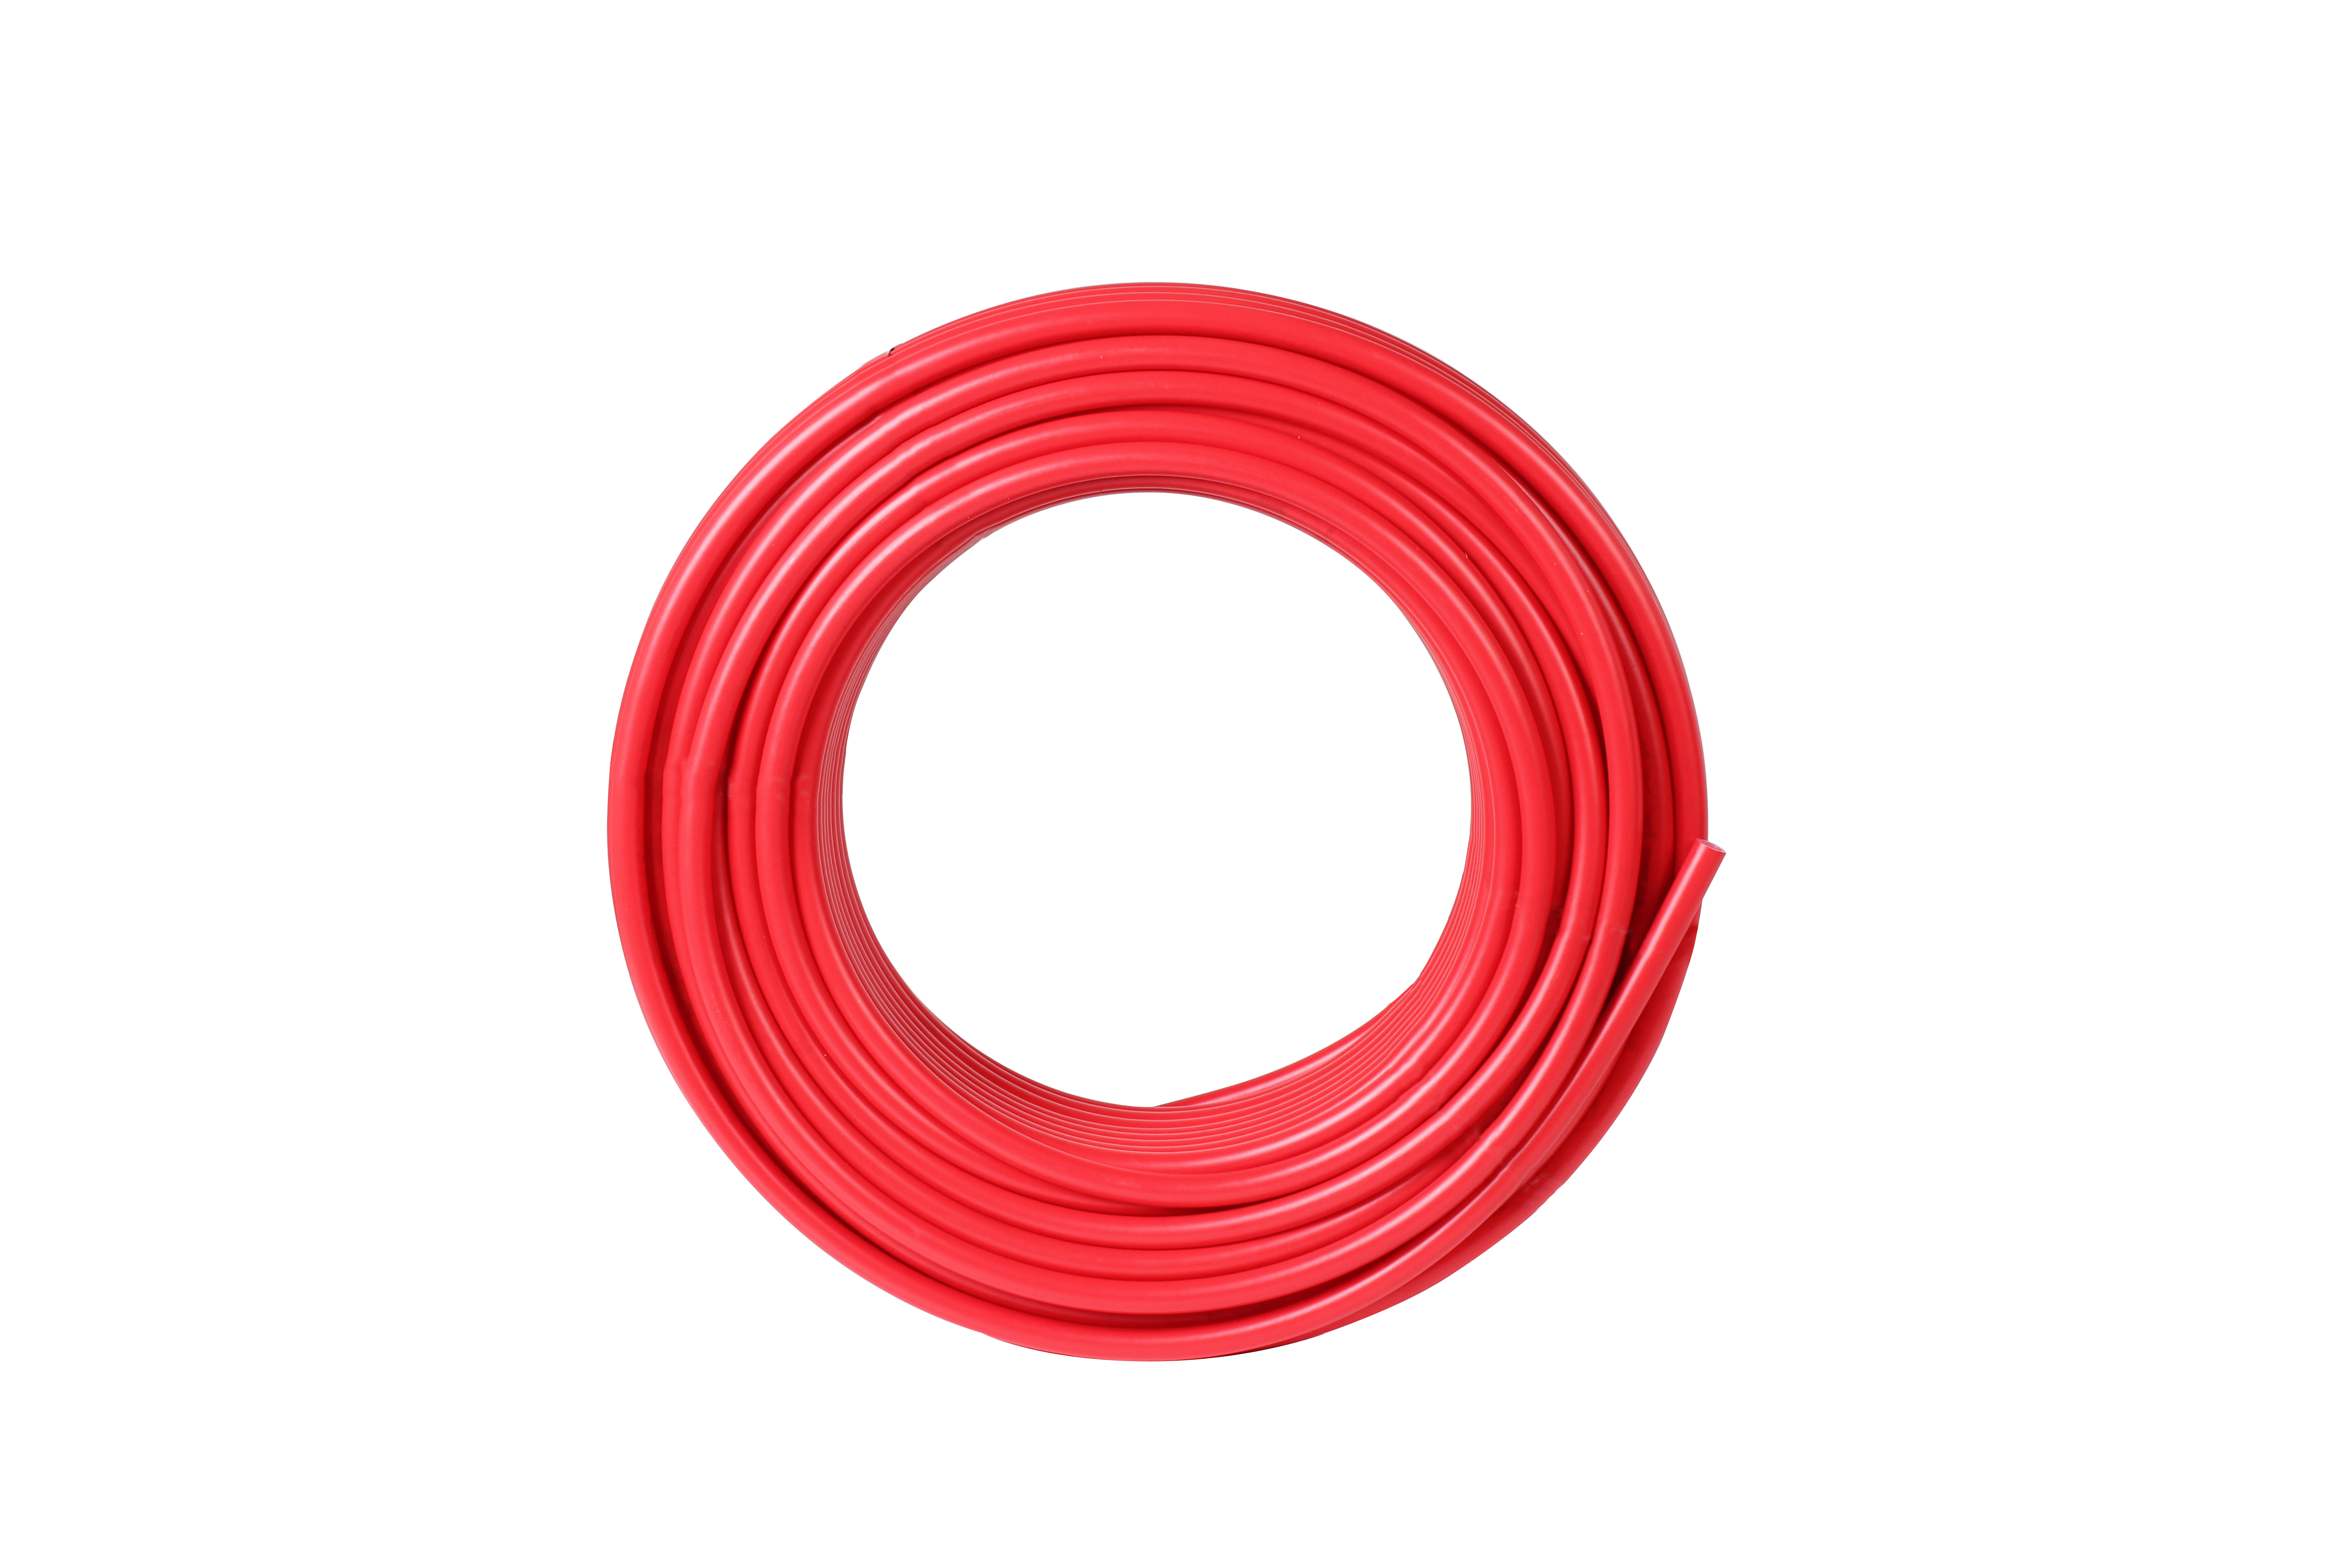 PIPE FORZA PEX-A 25MM X 50MT RED